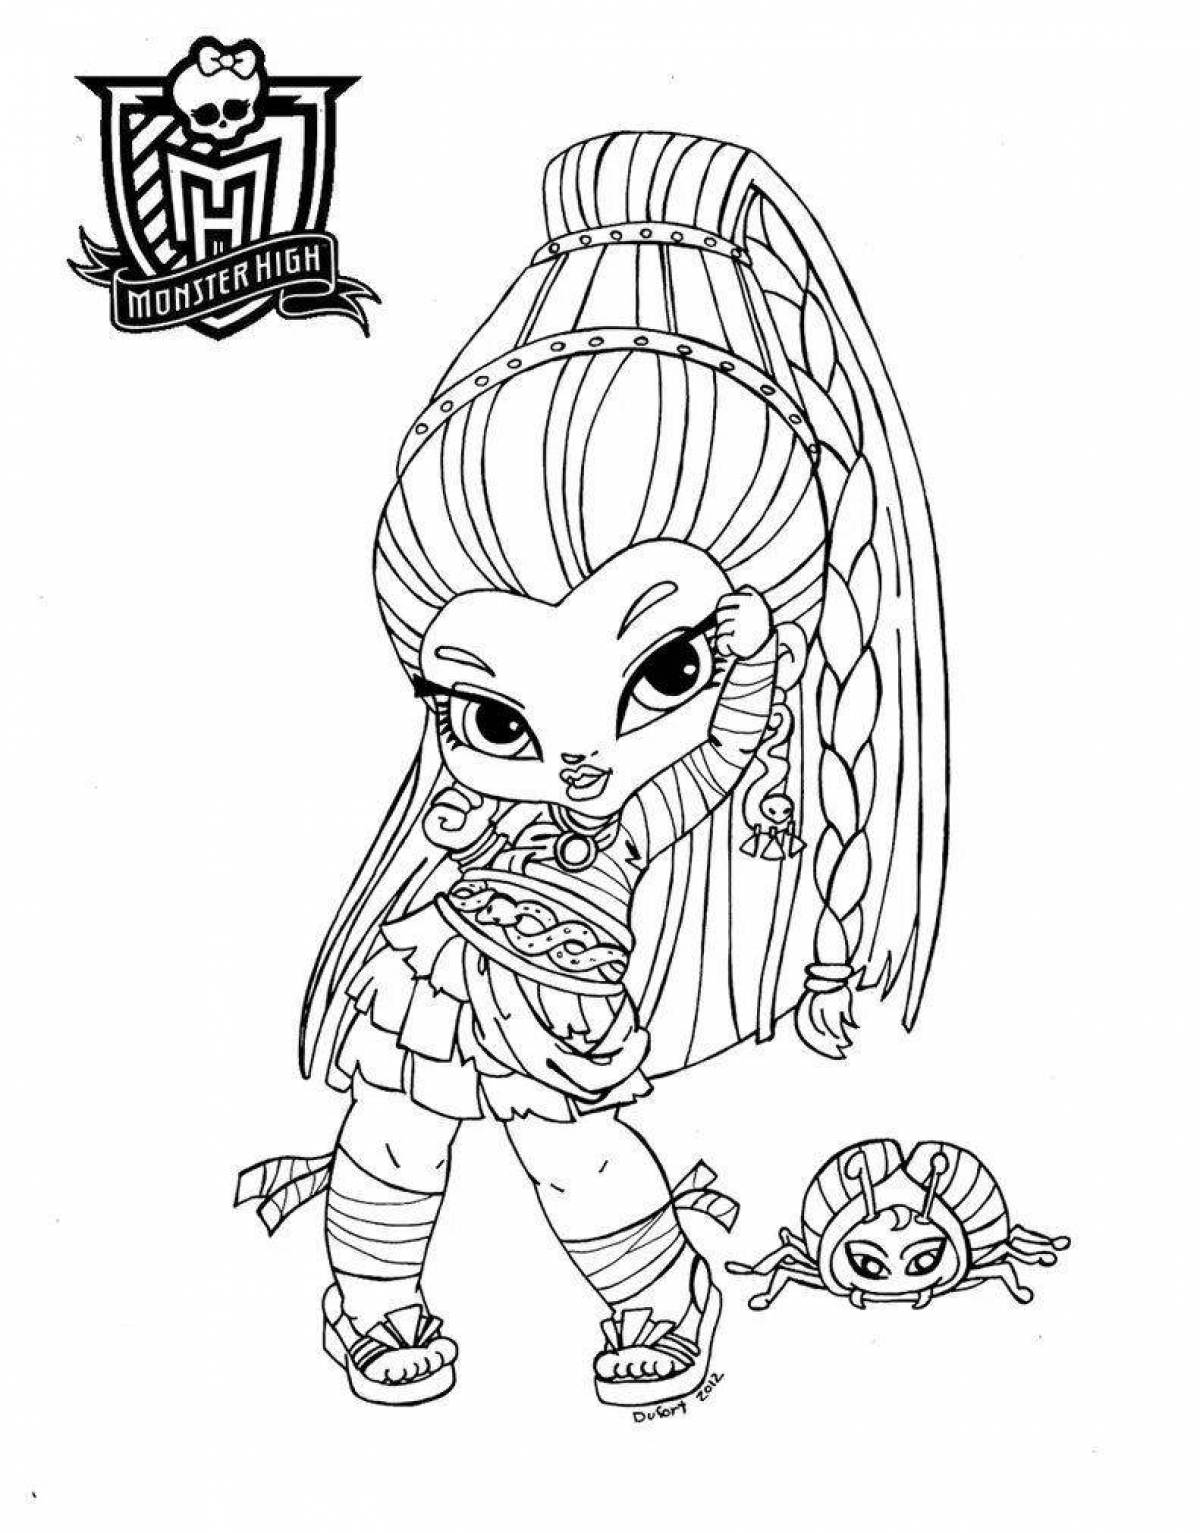 Splendid boxy boo monster coloring page